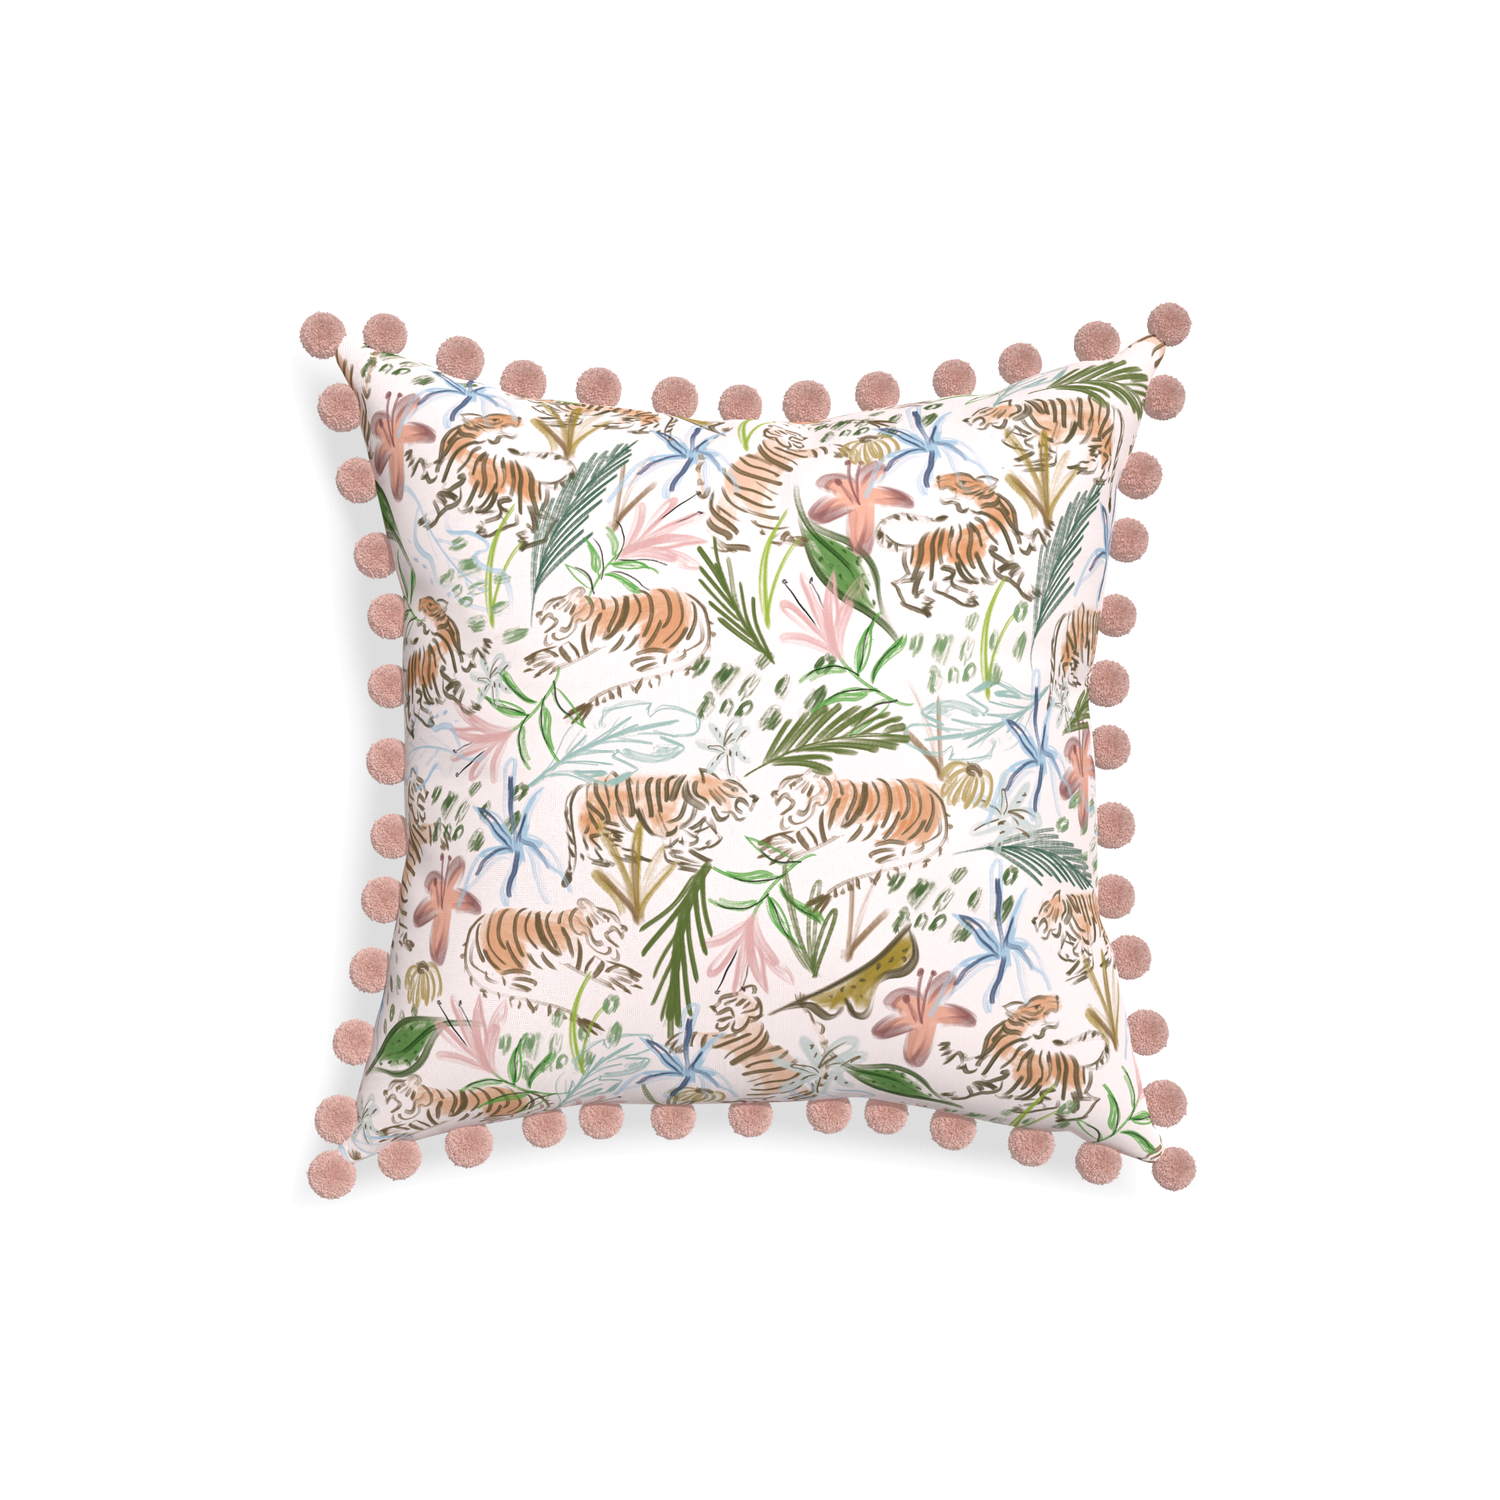 18-square frida pink custom pink chinoiserie tigerpillow with rose pom pom on white background